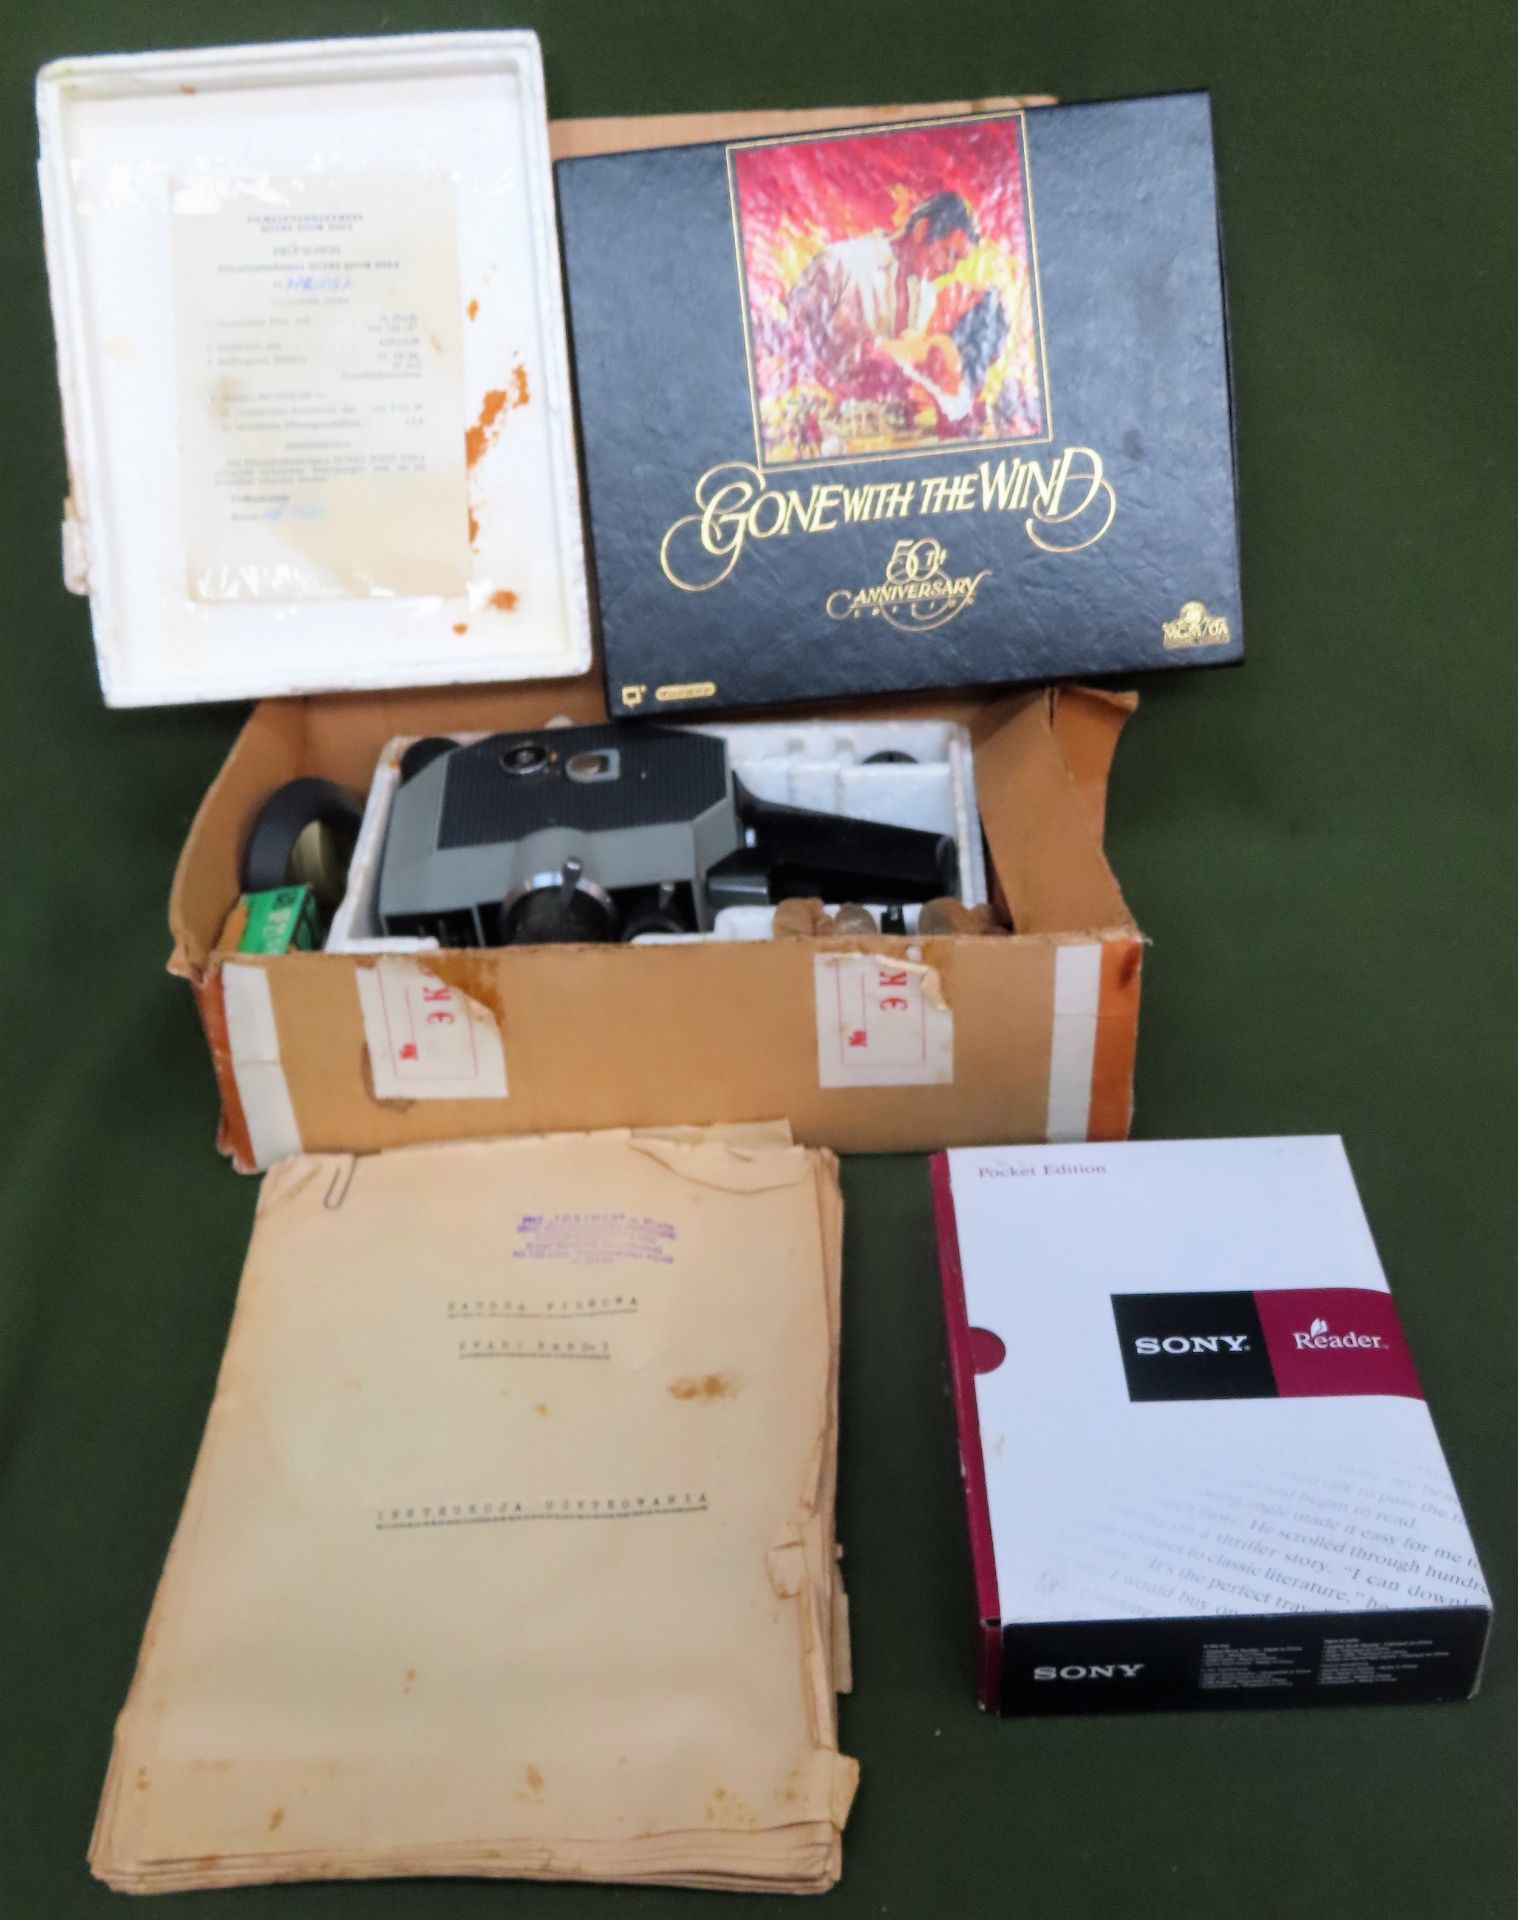 Sundry lot including Cine camera, E Book Reader, boxed Gone with the wind 50th anniversary VHS set